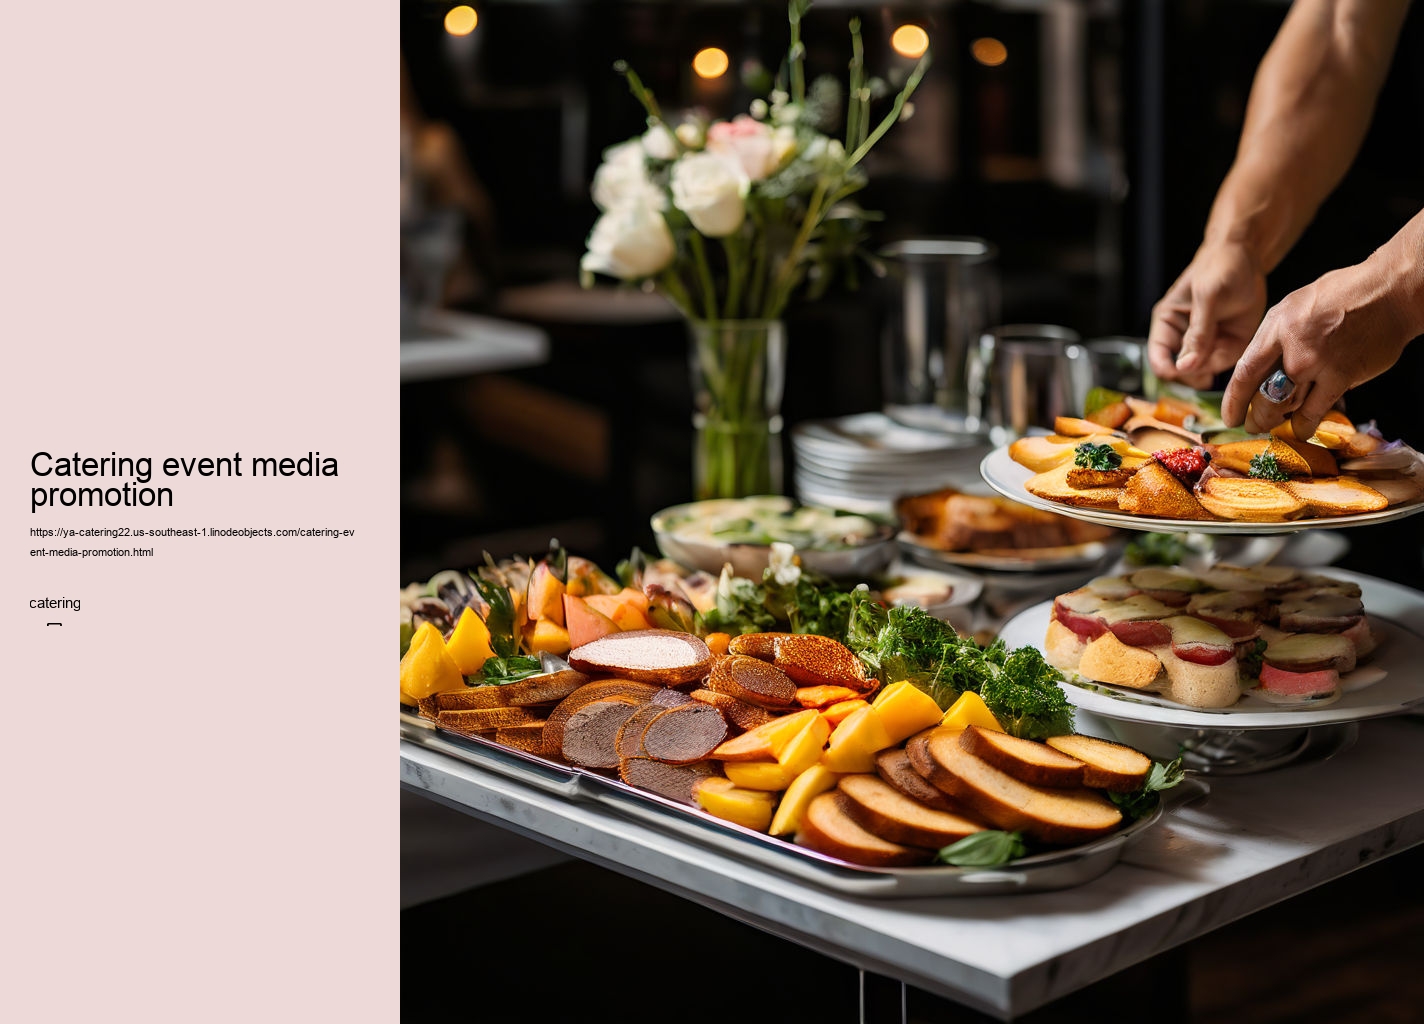 Catering event media promotion